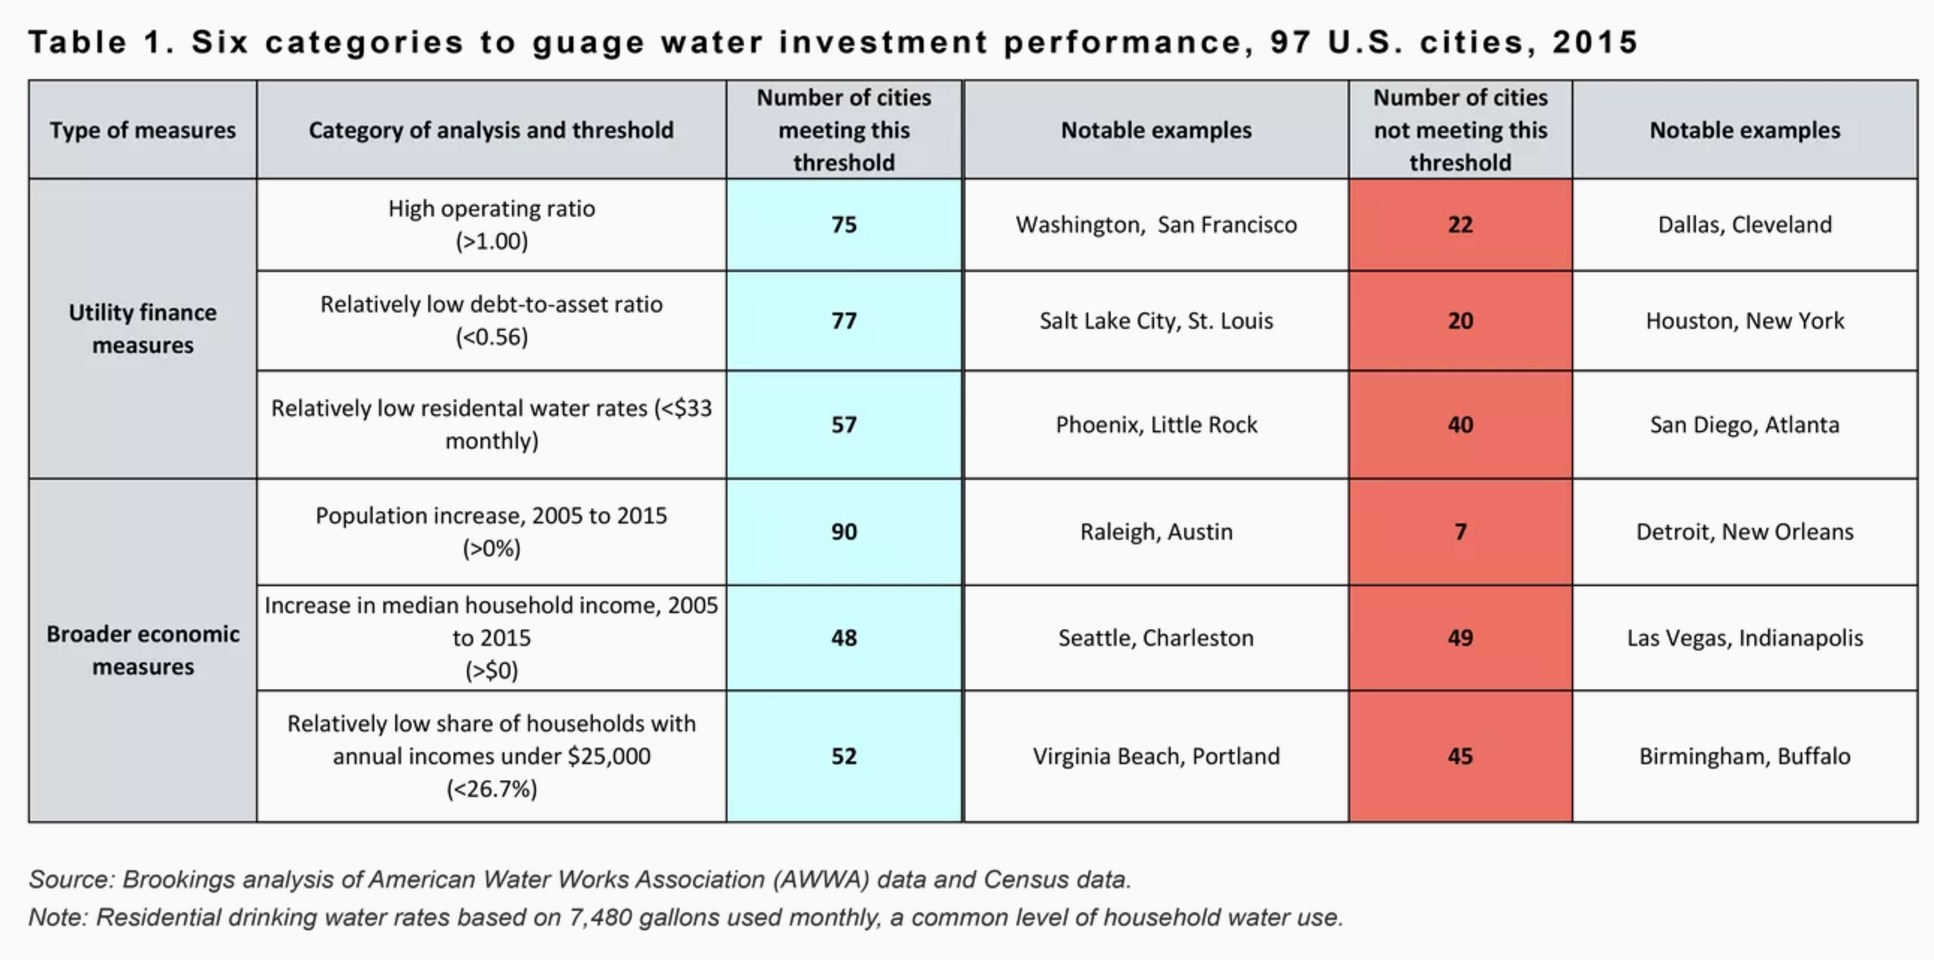 Table 1: Six Categories to Gauge Water Investment Performance, 97 Cities